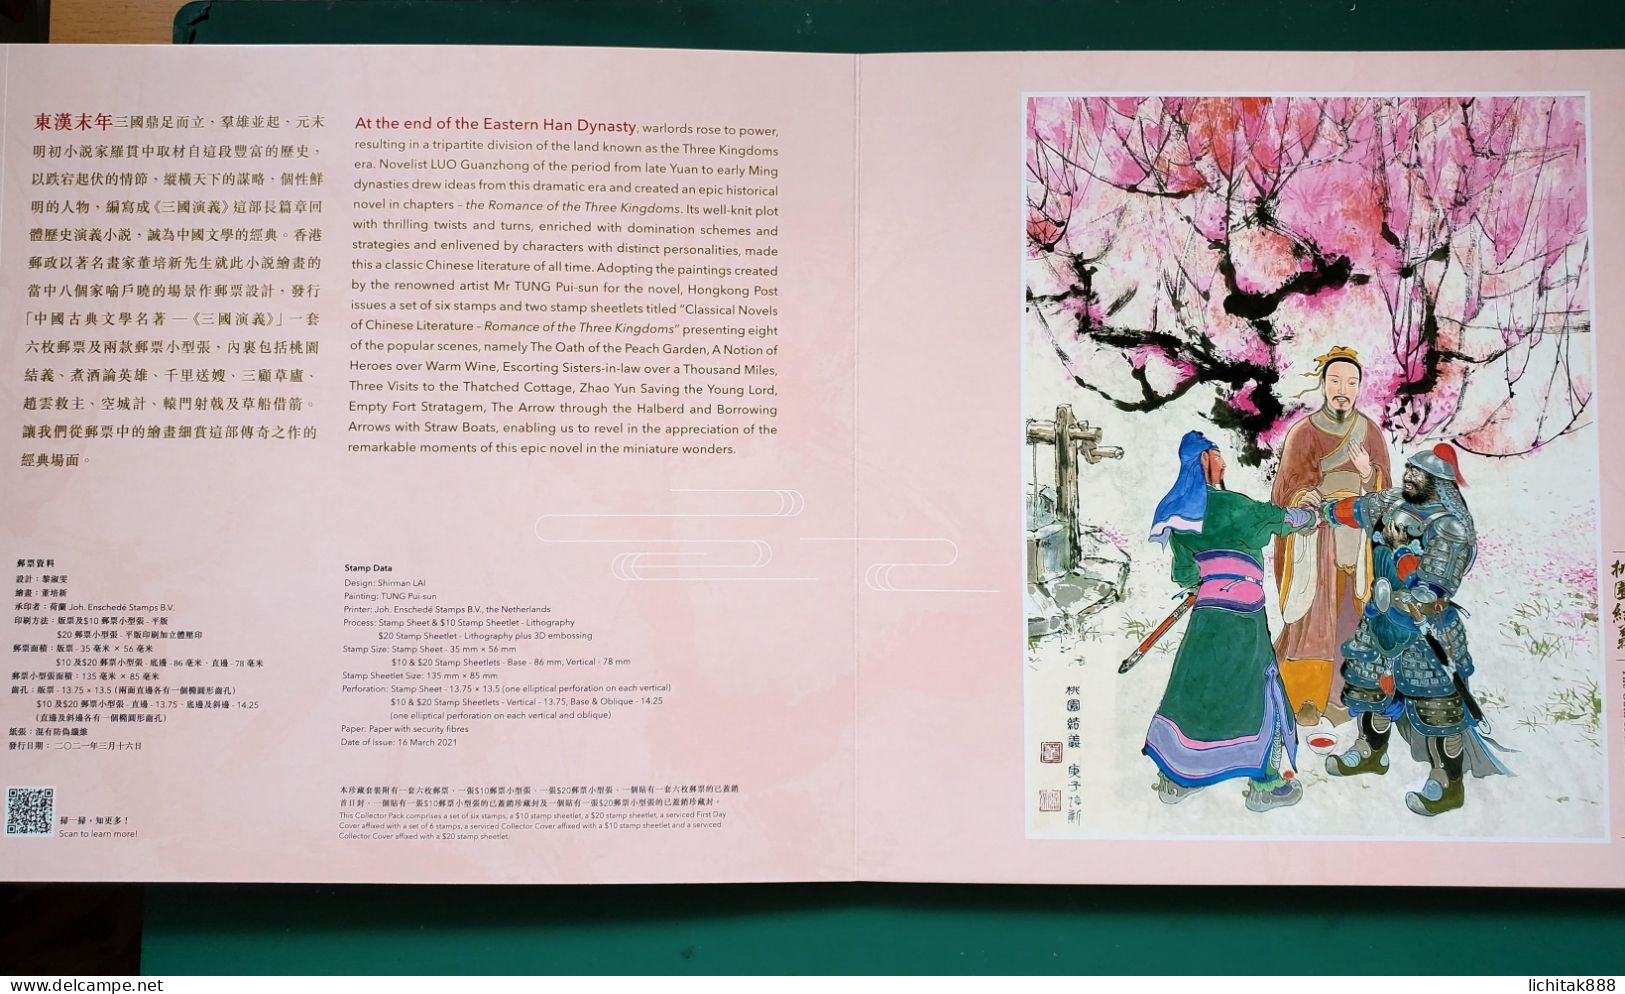 Hong Kong 2021 Classical Novels of Chinese Literature – Romance of the Three Kingdoms Special Collector Pack